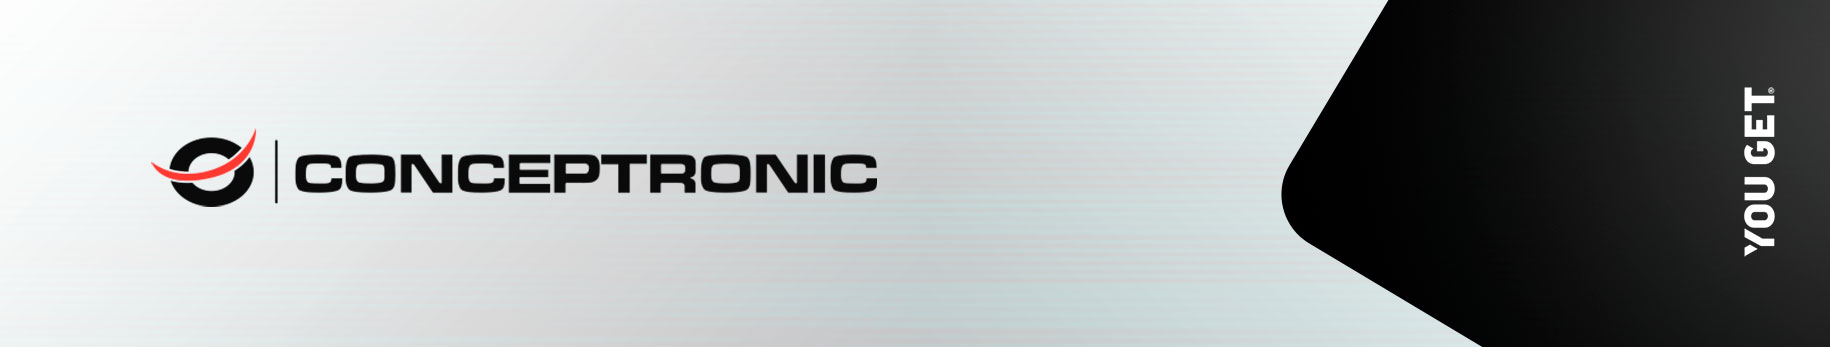 banner Conceptronic